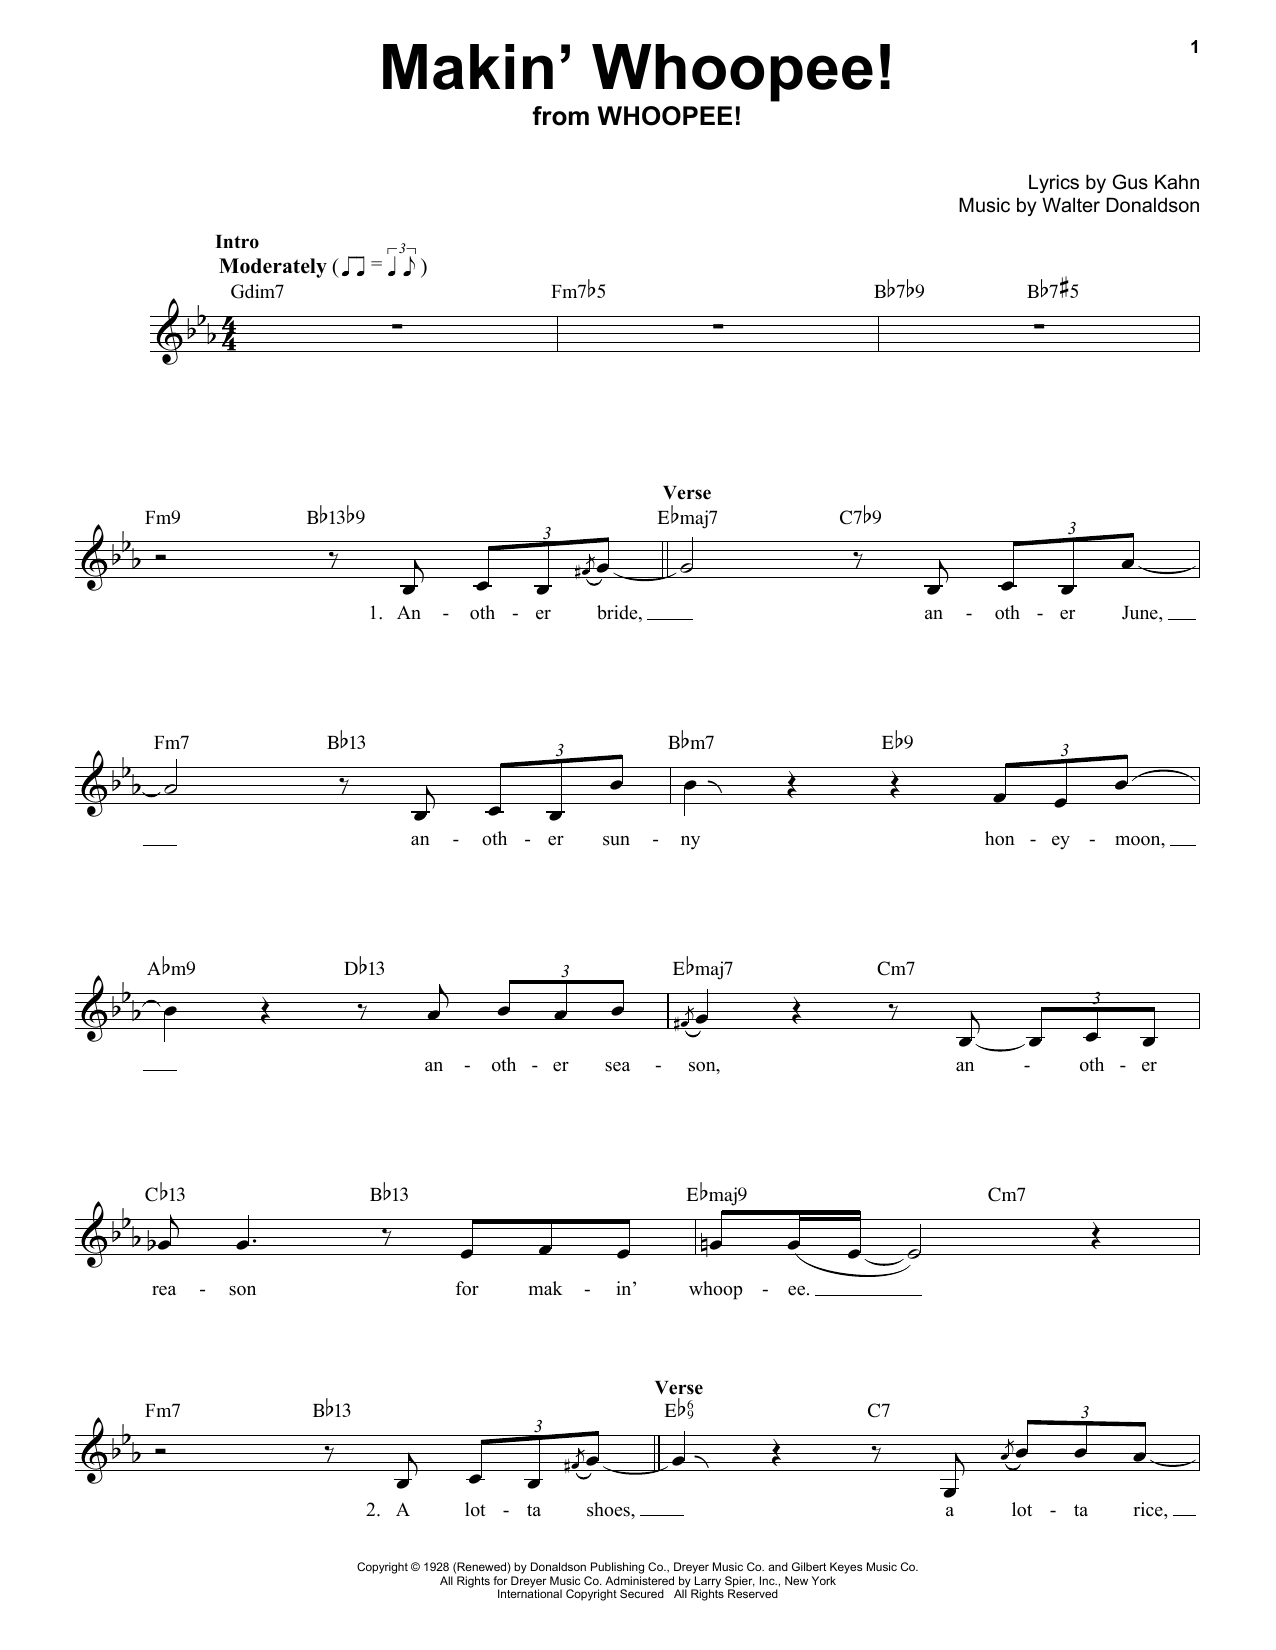 Download Nat King Cole Makin' Whoopee! Sheet Music